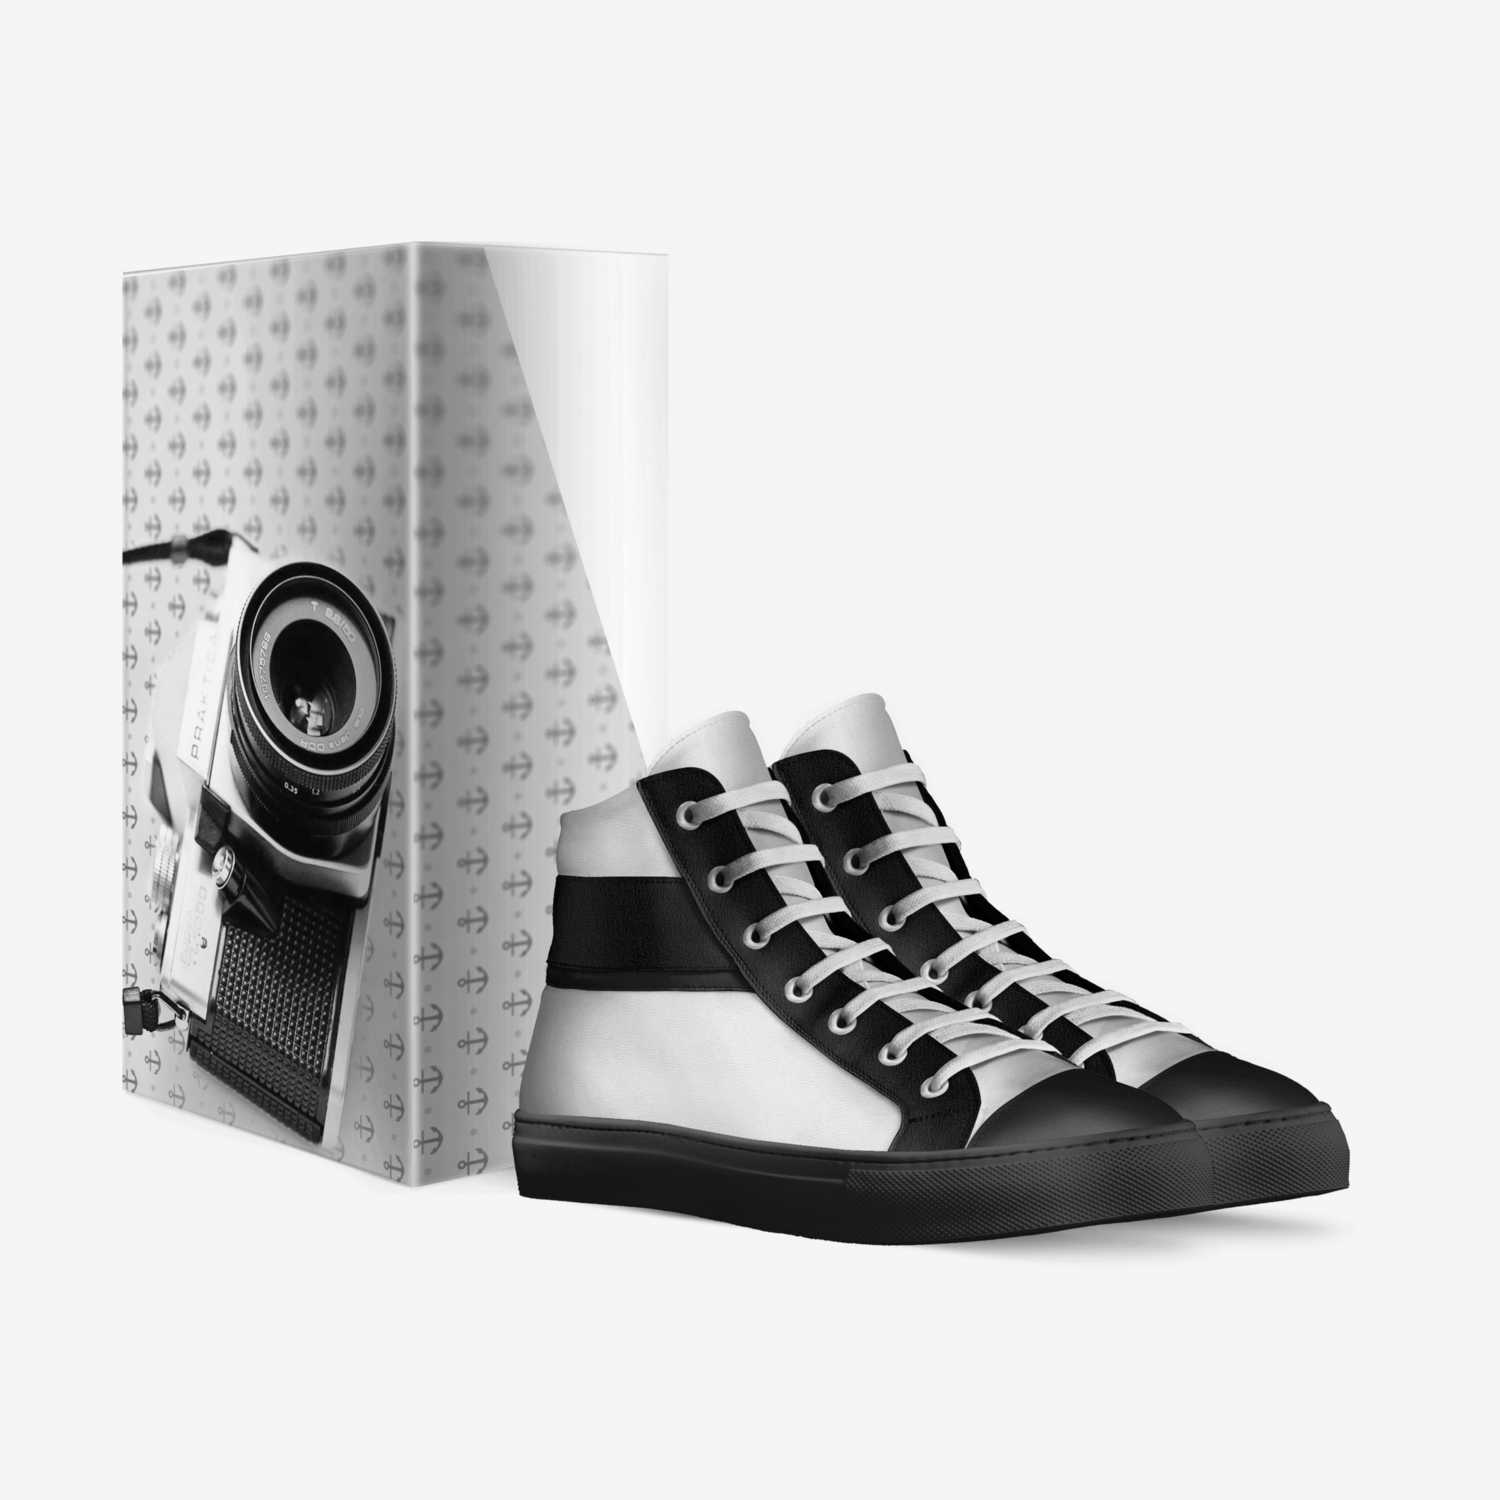 B&W custom made in Italy shoes by Beatrice Redi | Box view